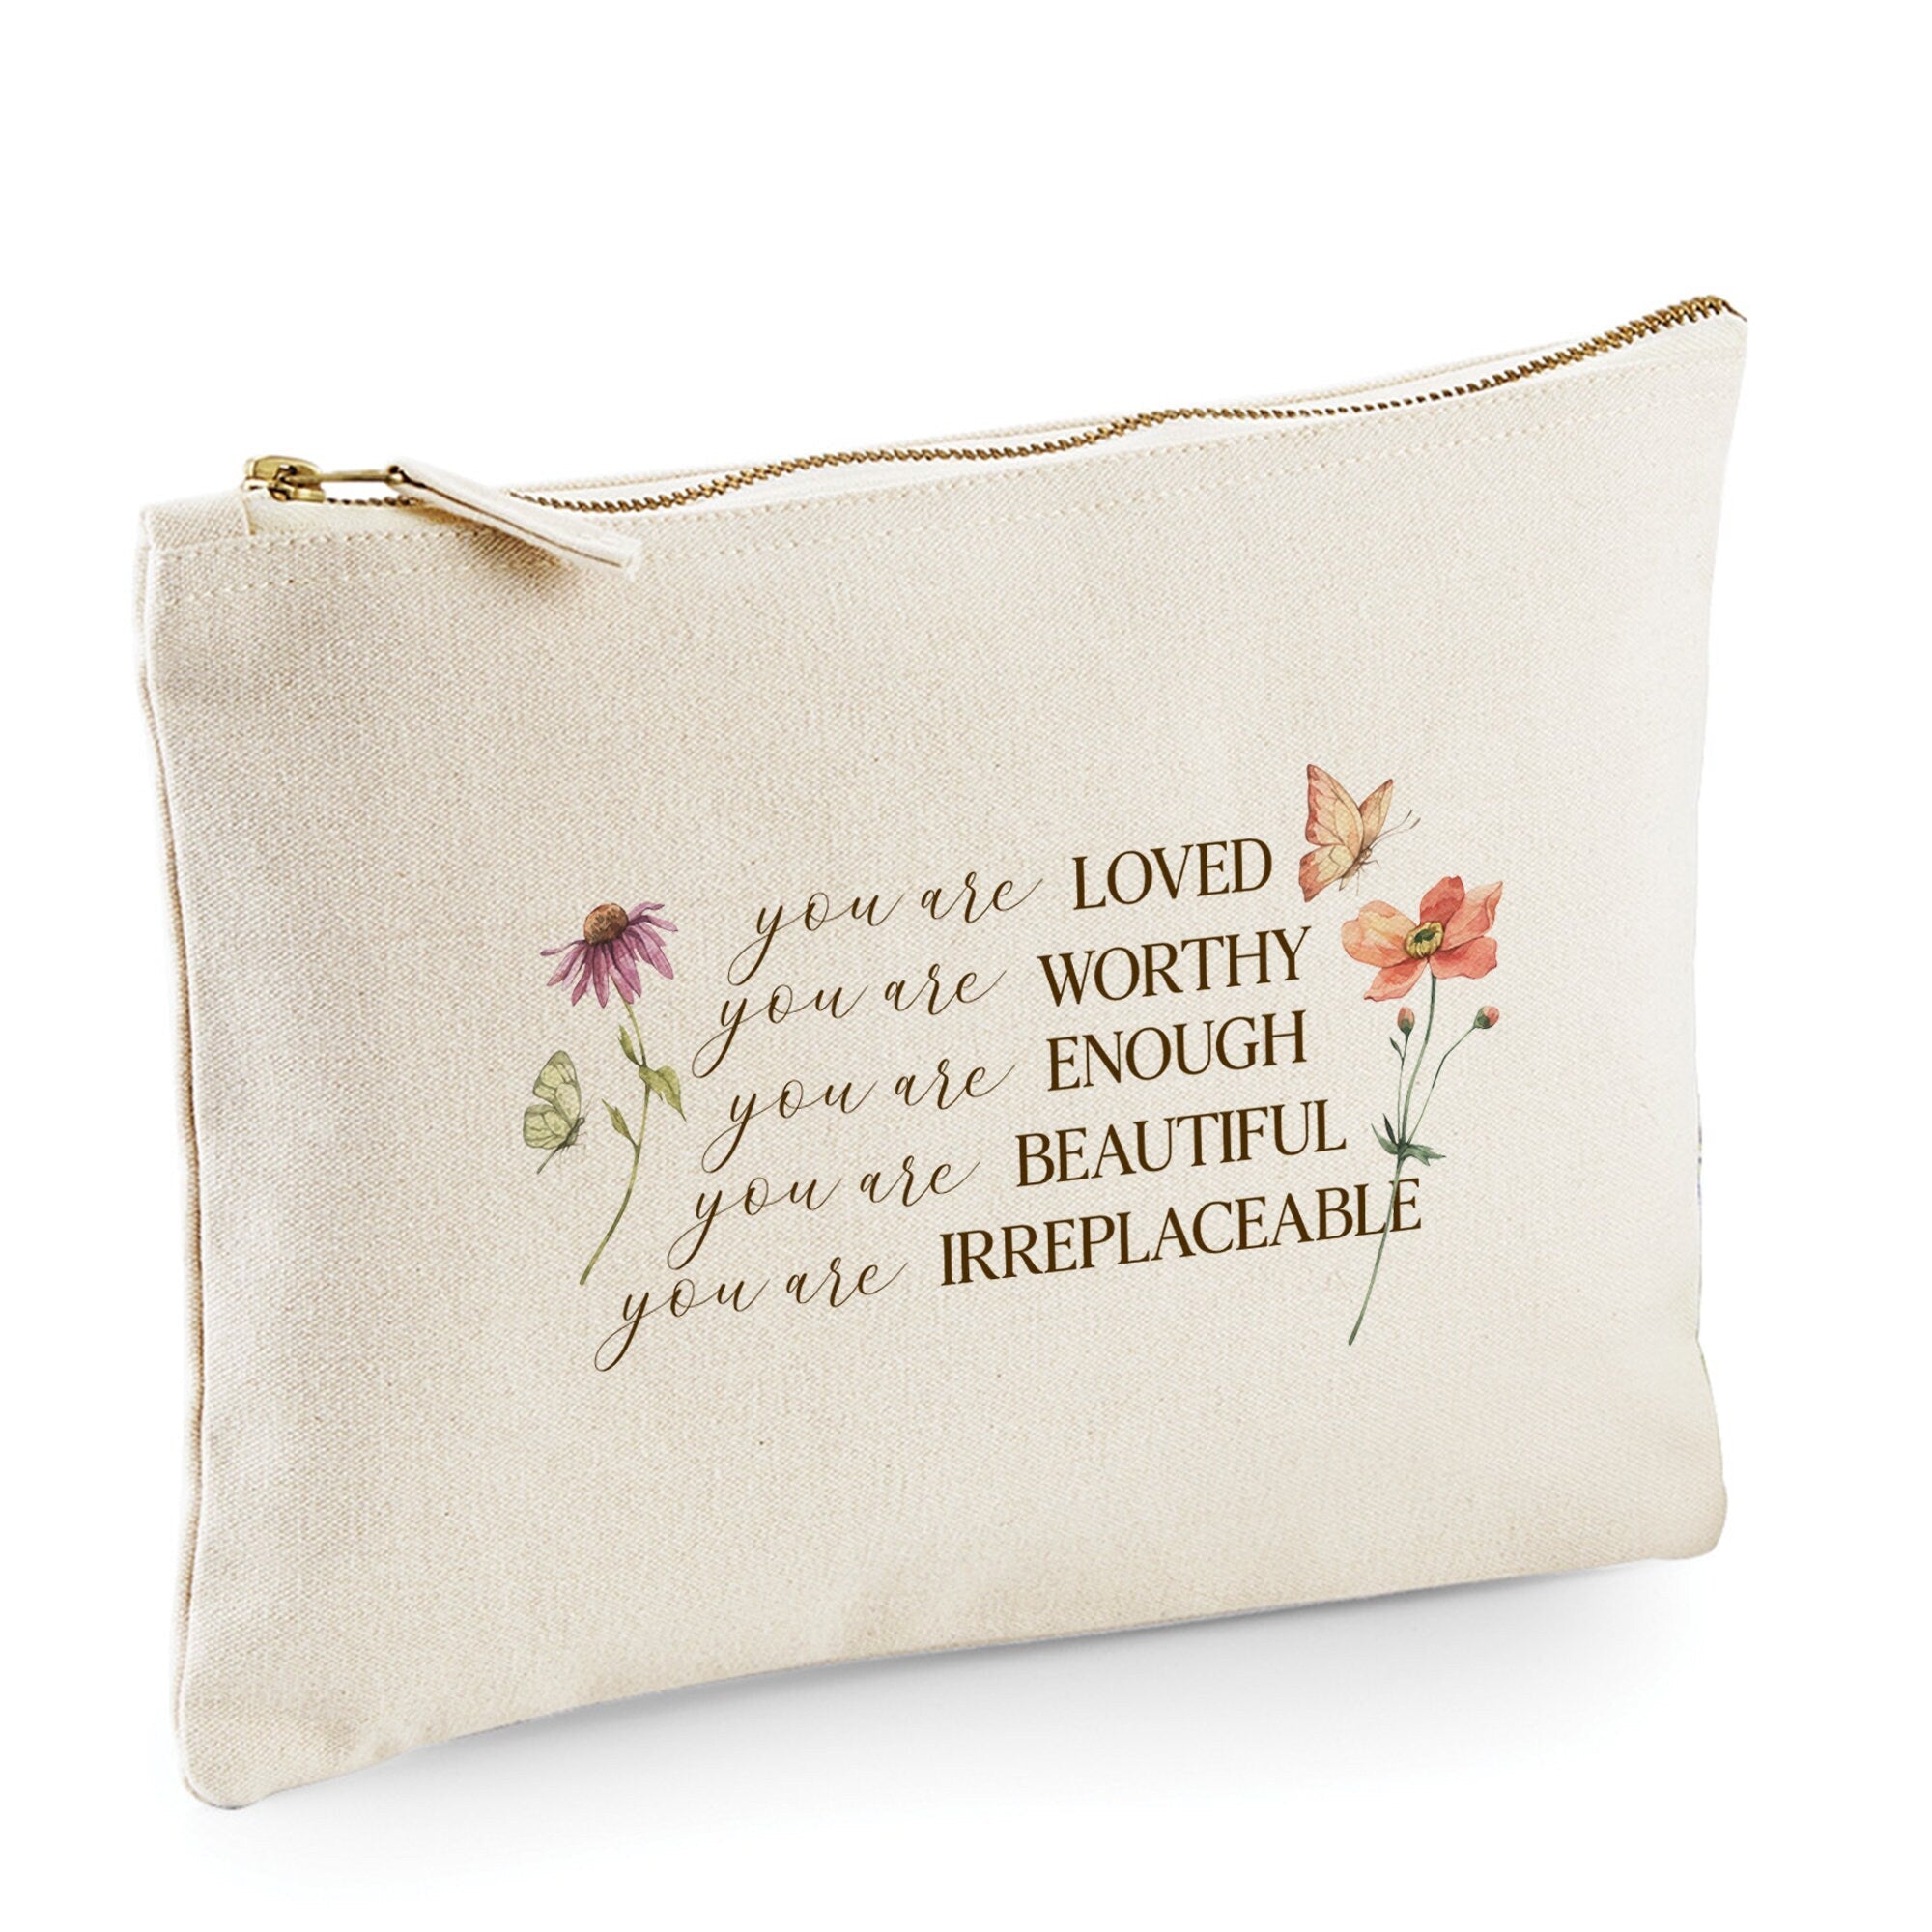 You Are Loved You Are Enough Makeup Bag, Christmas Or Birthday Gift For Her Sister